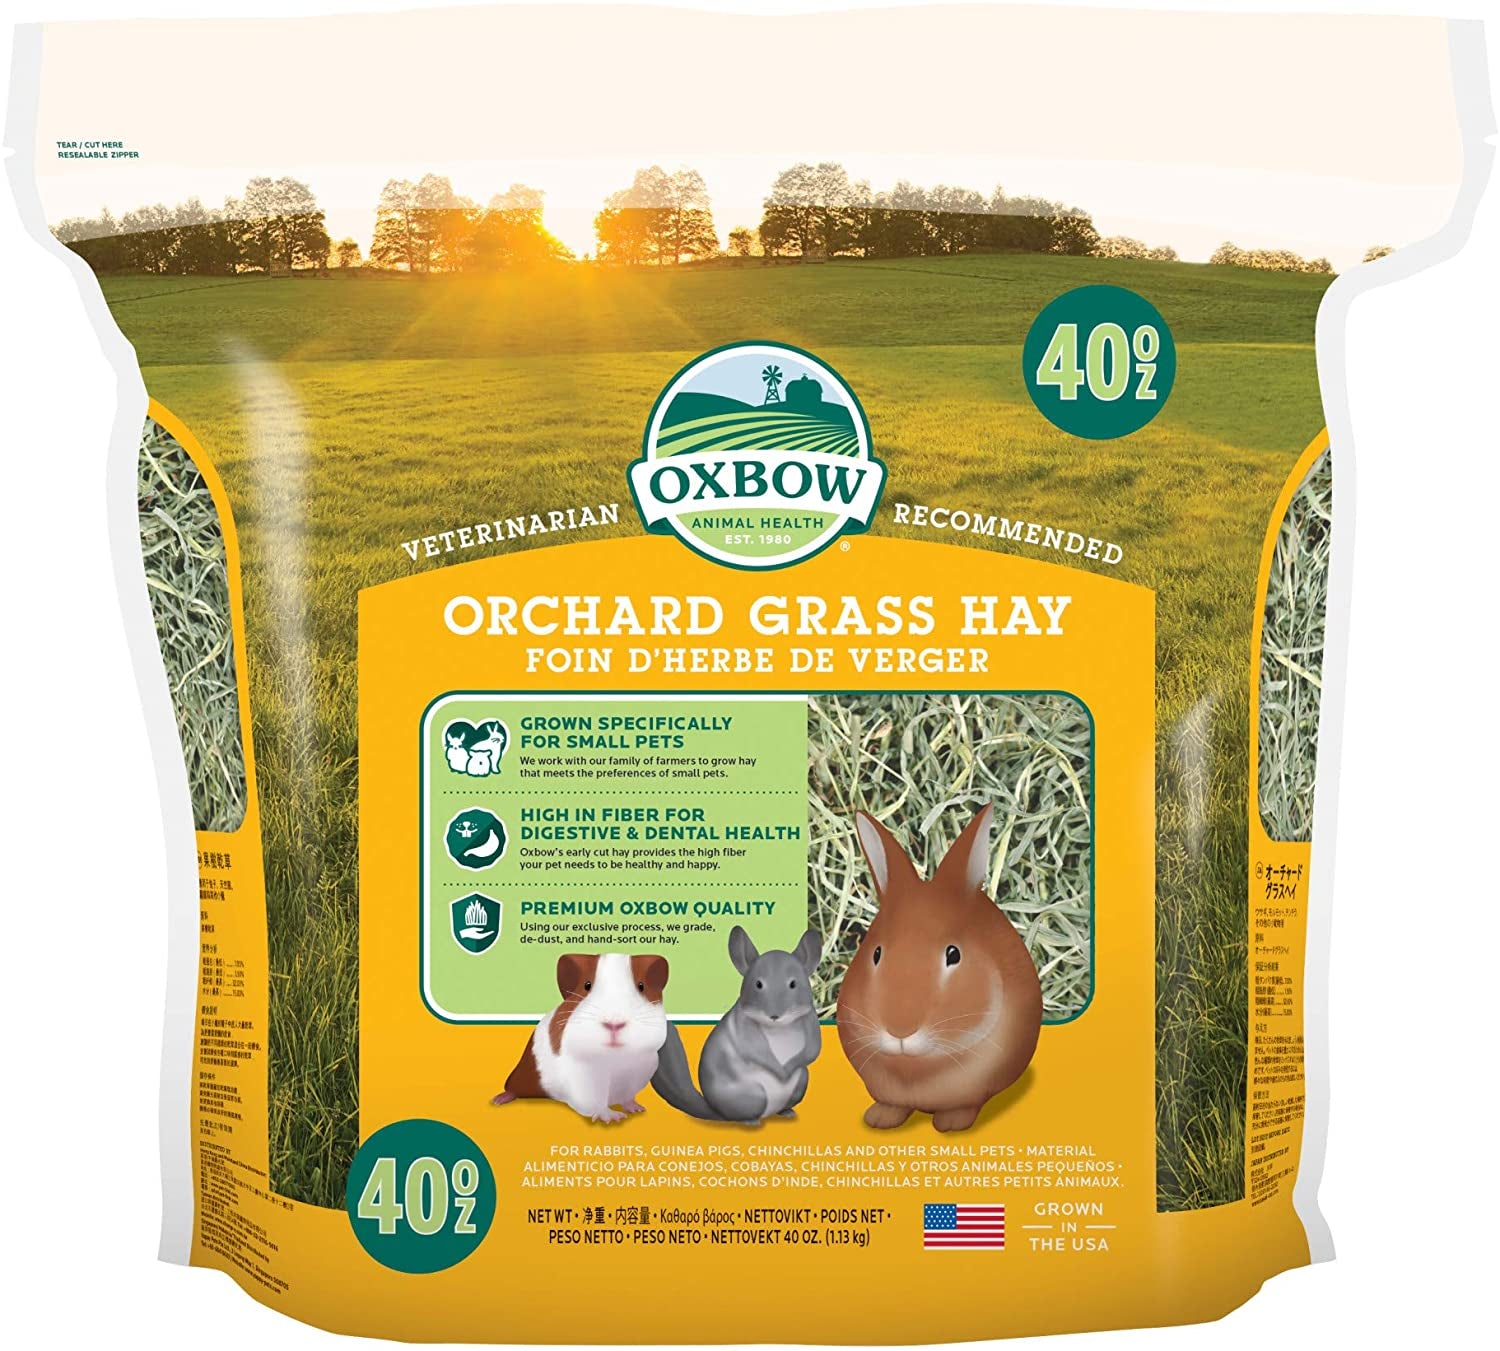 Oxbow Animal Health Orchard Grass Hay - All Natural Grass Hay for Chinchillas, Rabbits, Guinea Pigs, Hamsters & Gerbils - 40 Oz.